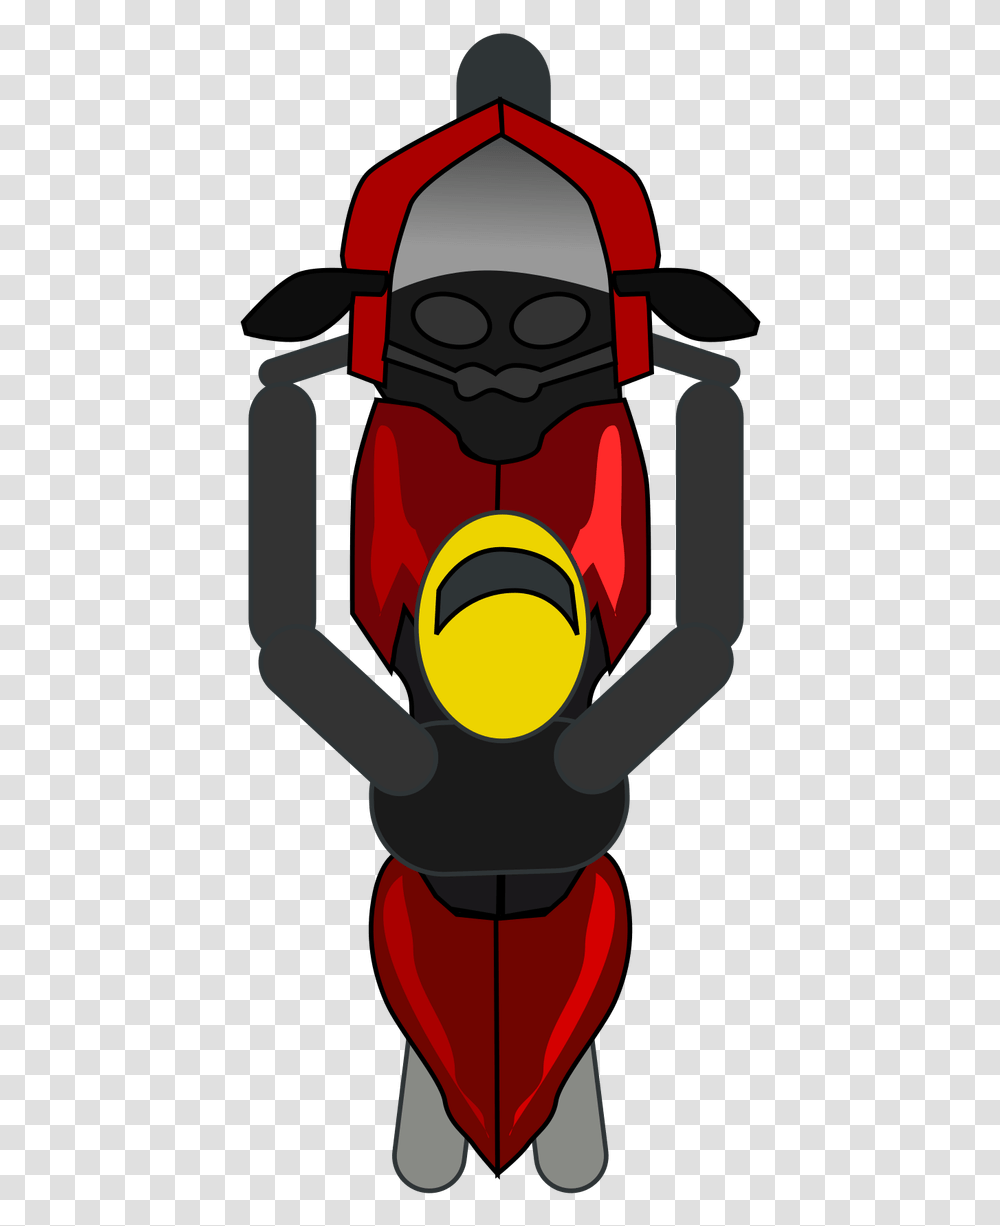 Biker Vector Top View Motorcycle Top View Vector, Light, Dynamite, Bomb, Weapon Transparent Png